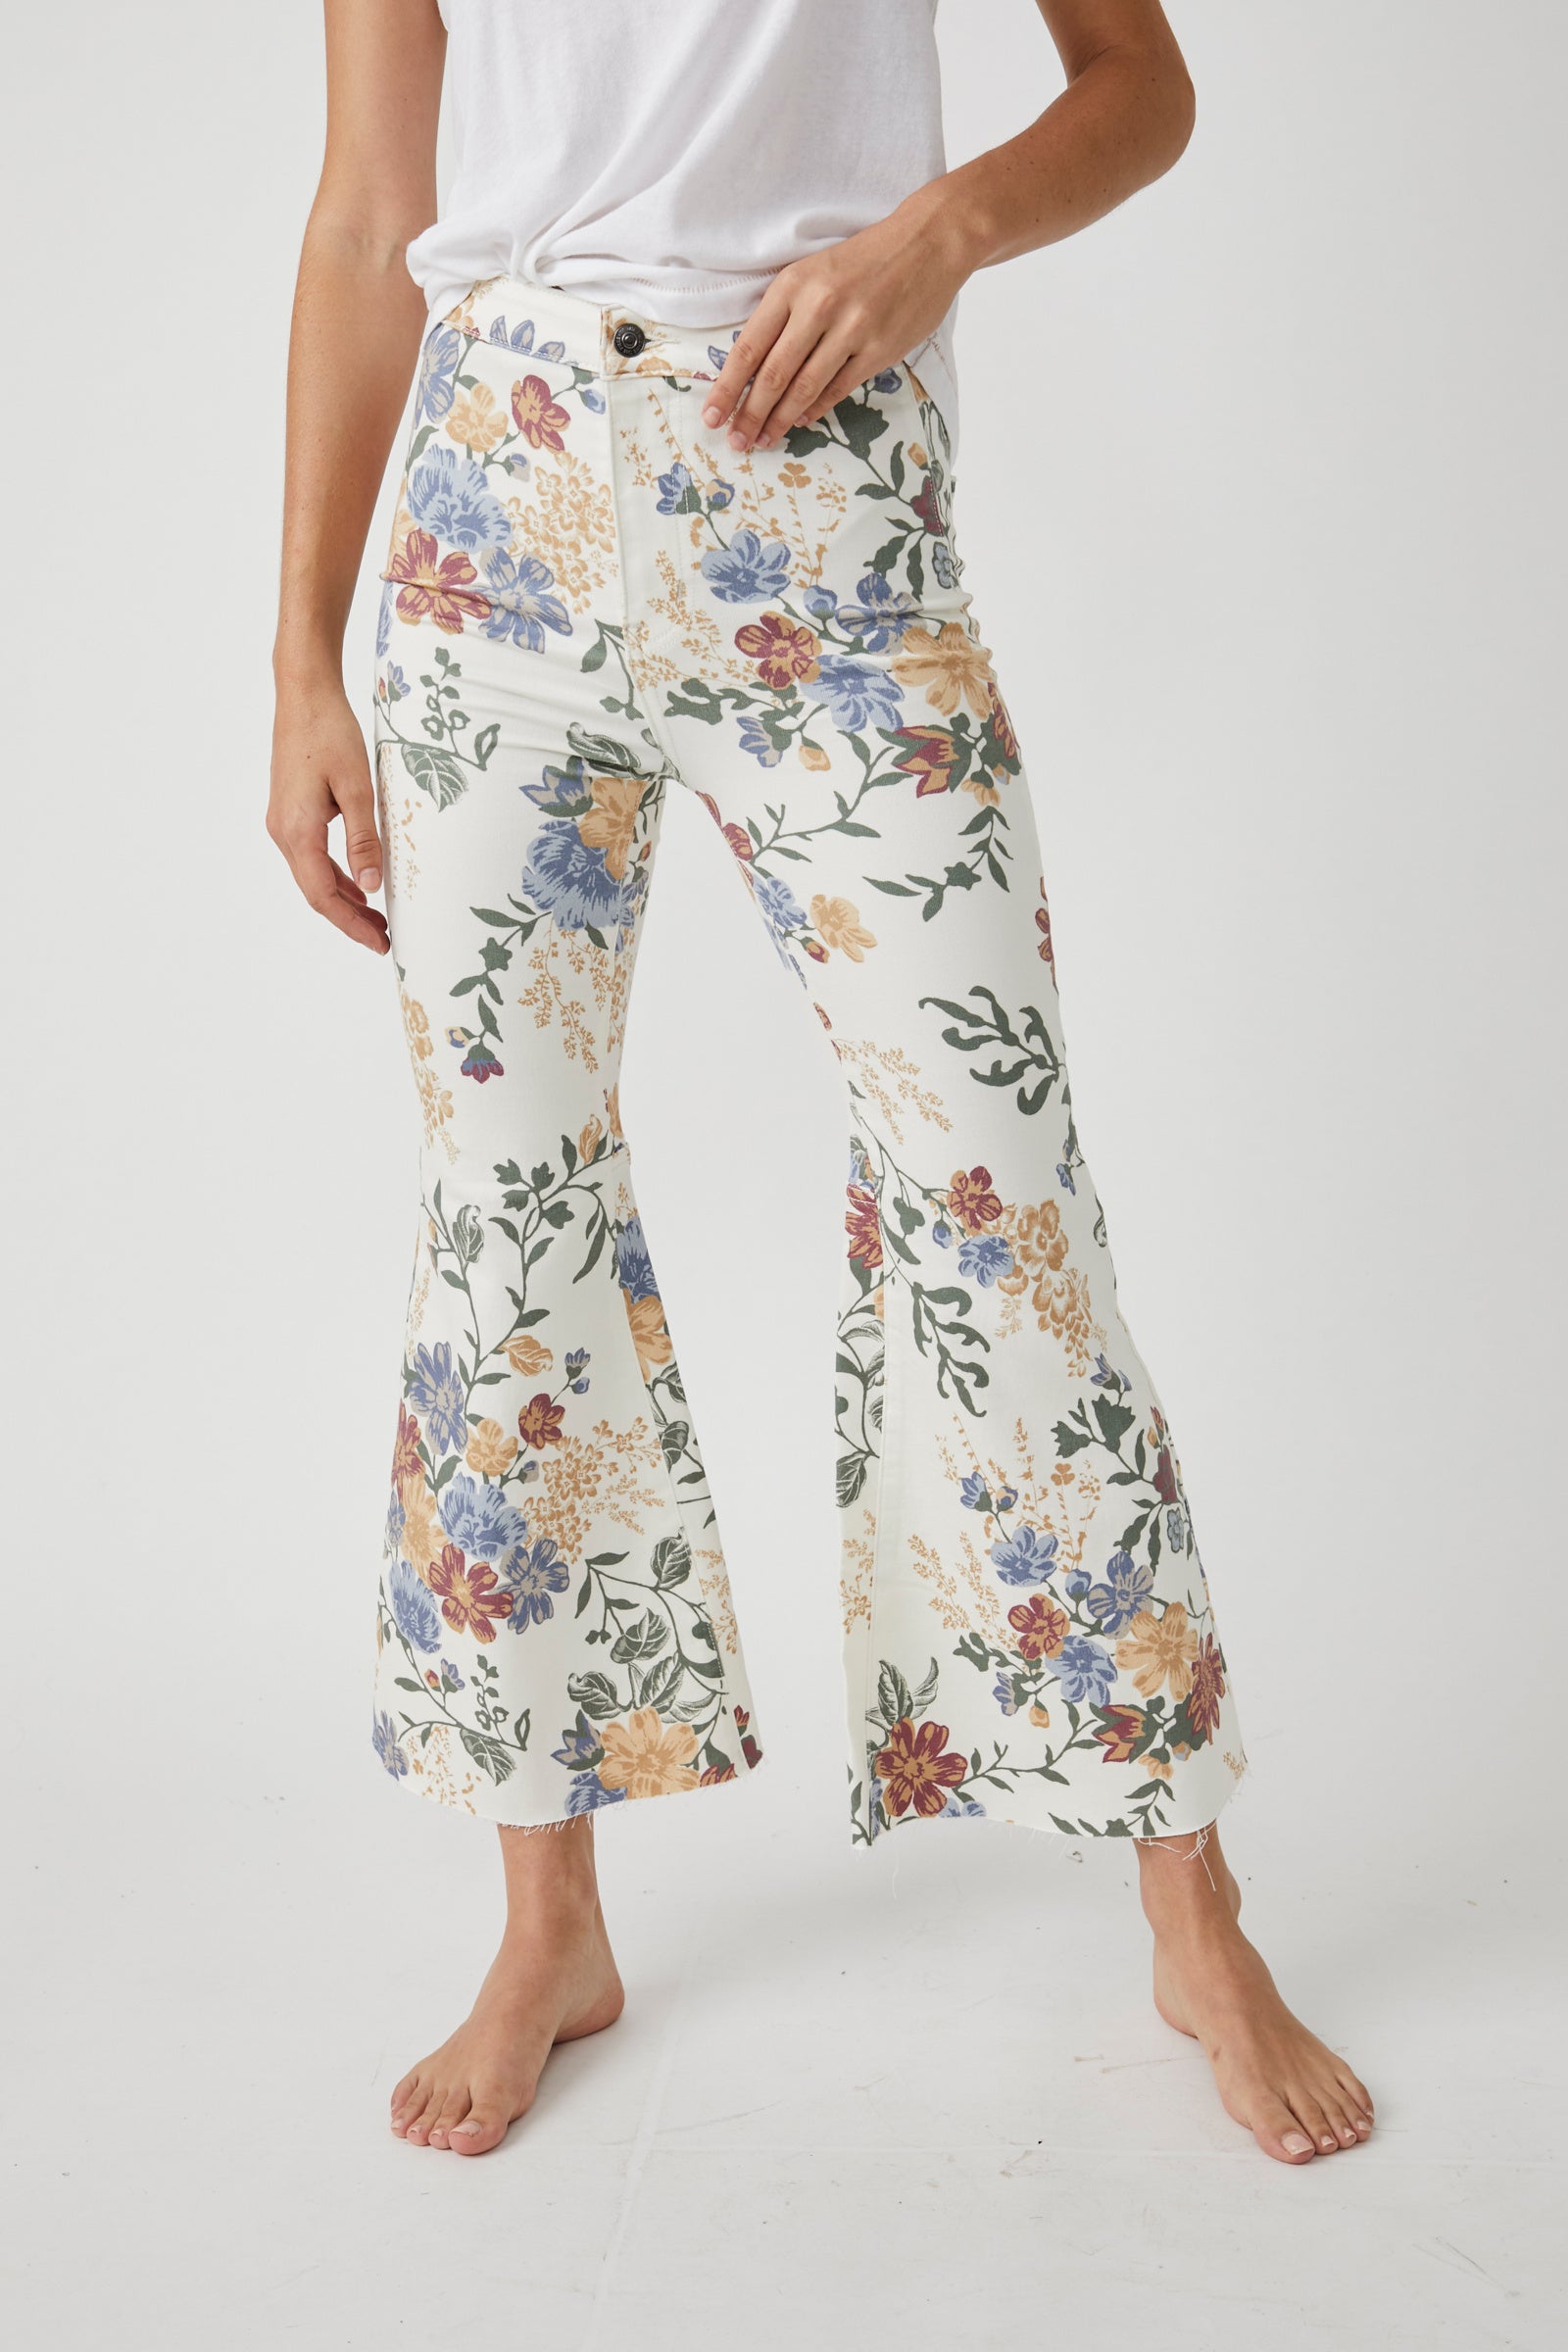 FREE PEOPLE YOUTHQUAKE PRINTED CROP PANTS IN IVORY